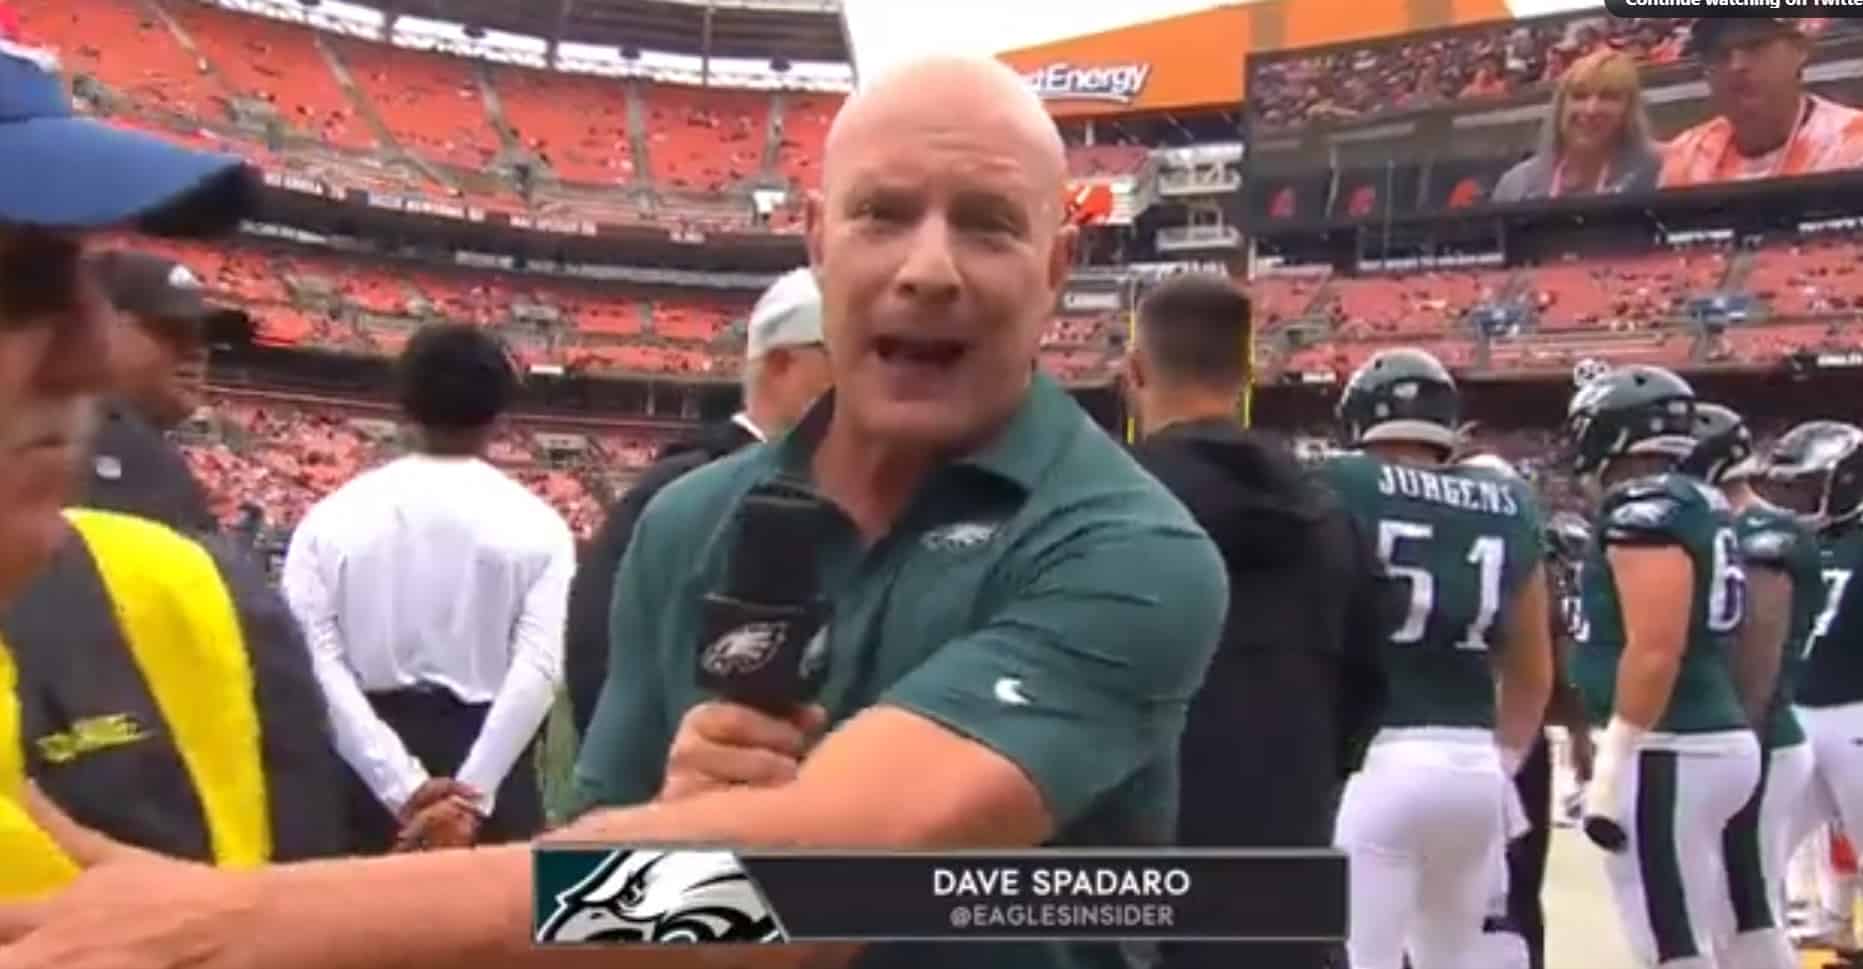 Dave Spadaro Gave Us the Behind the Scenes of His Confrontation with Chain Gang Member